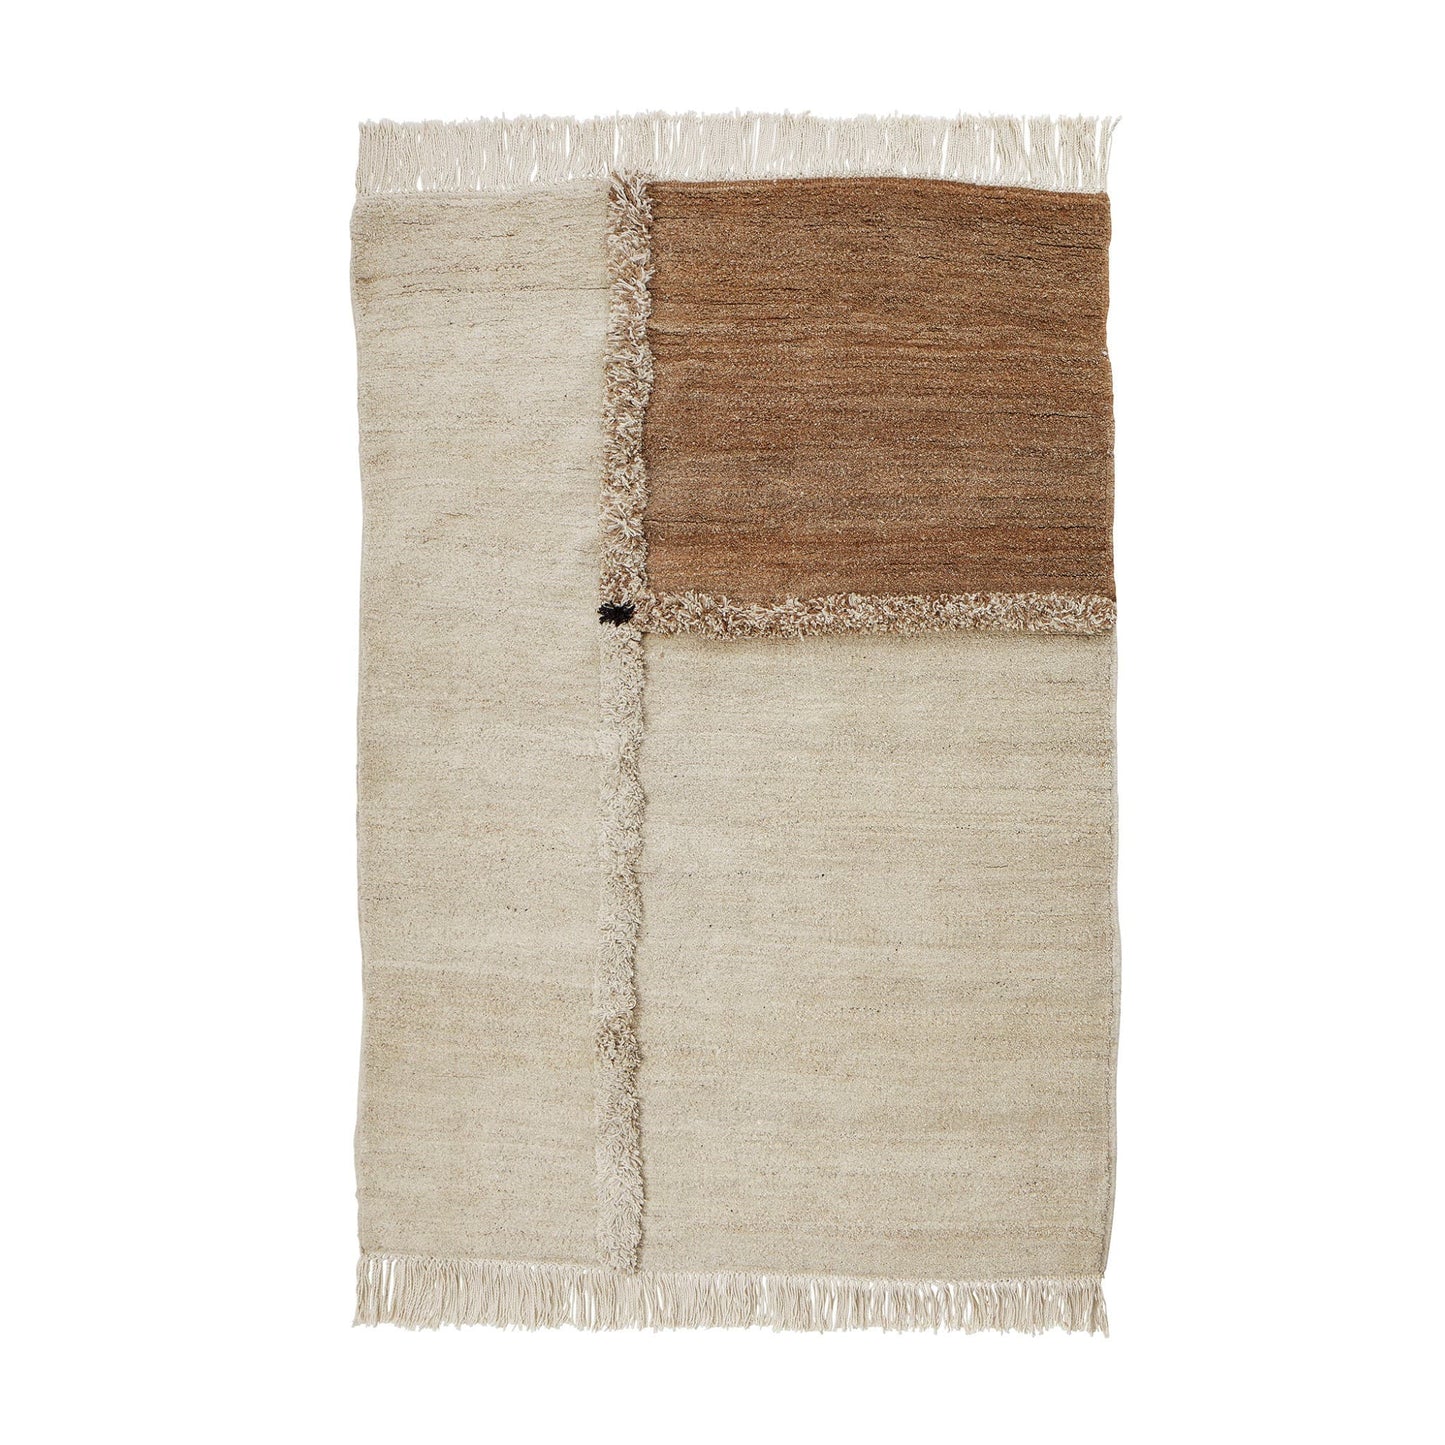 E-1027 rug knotted